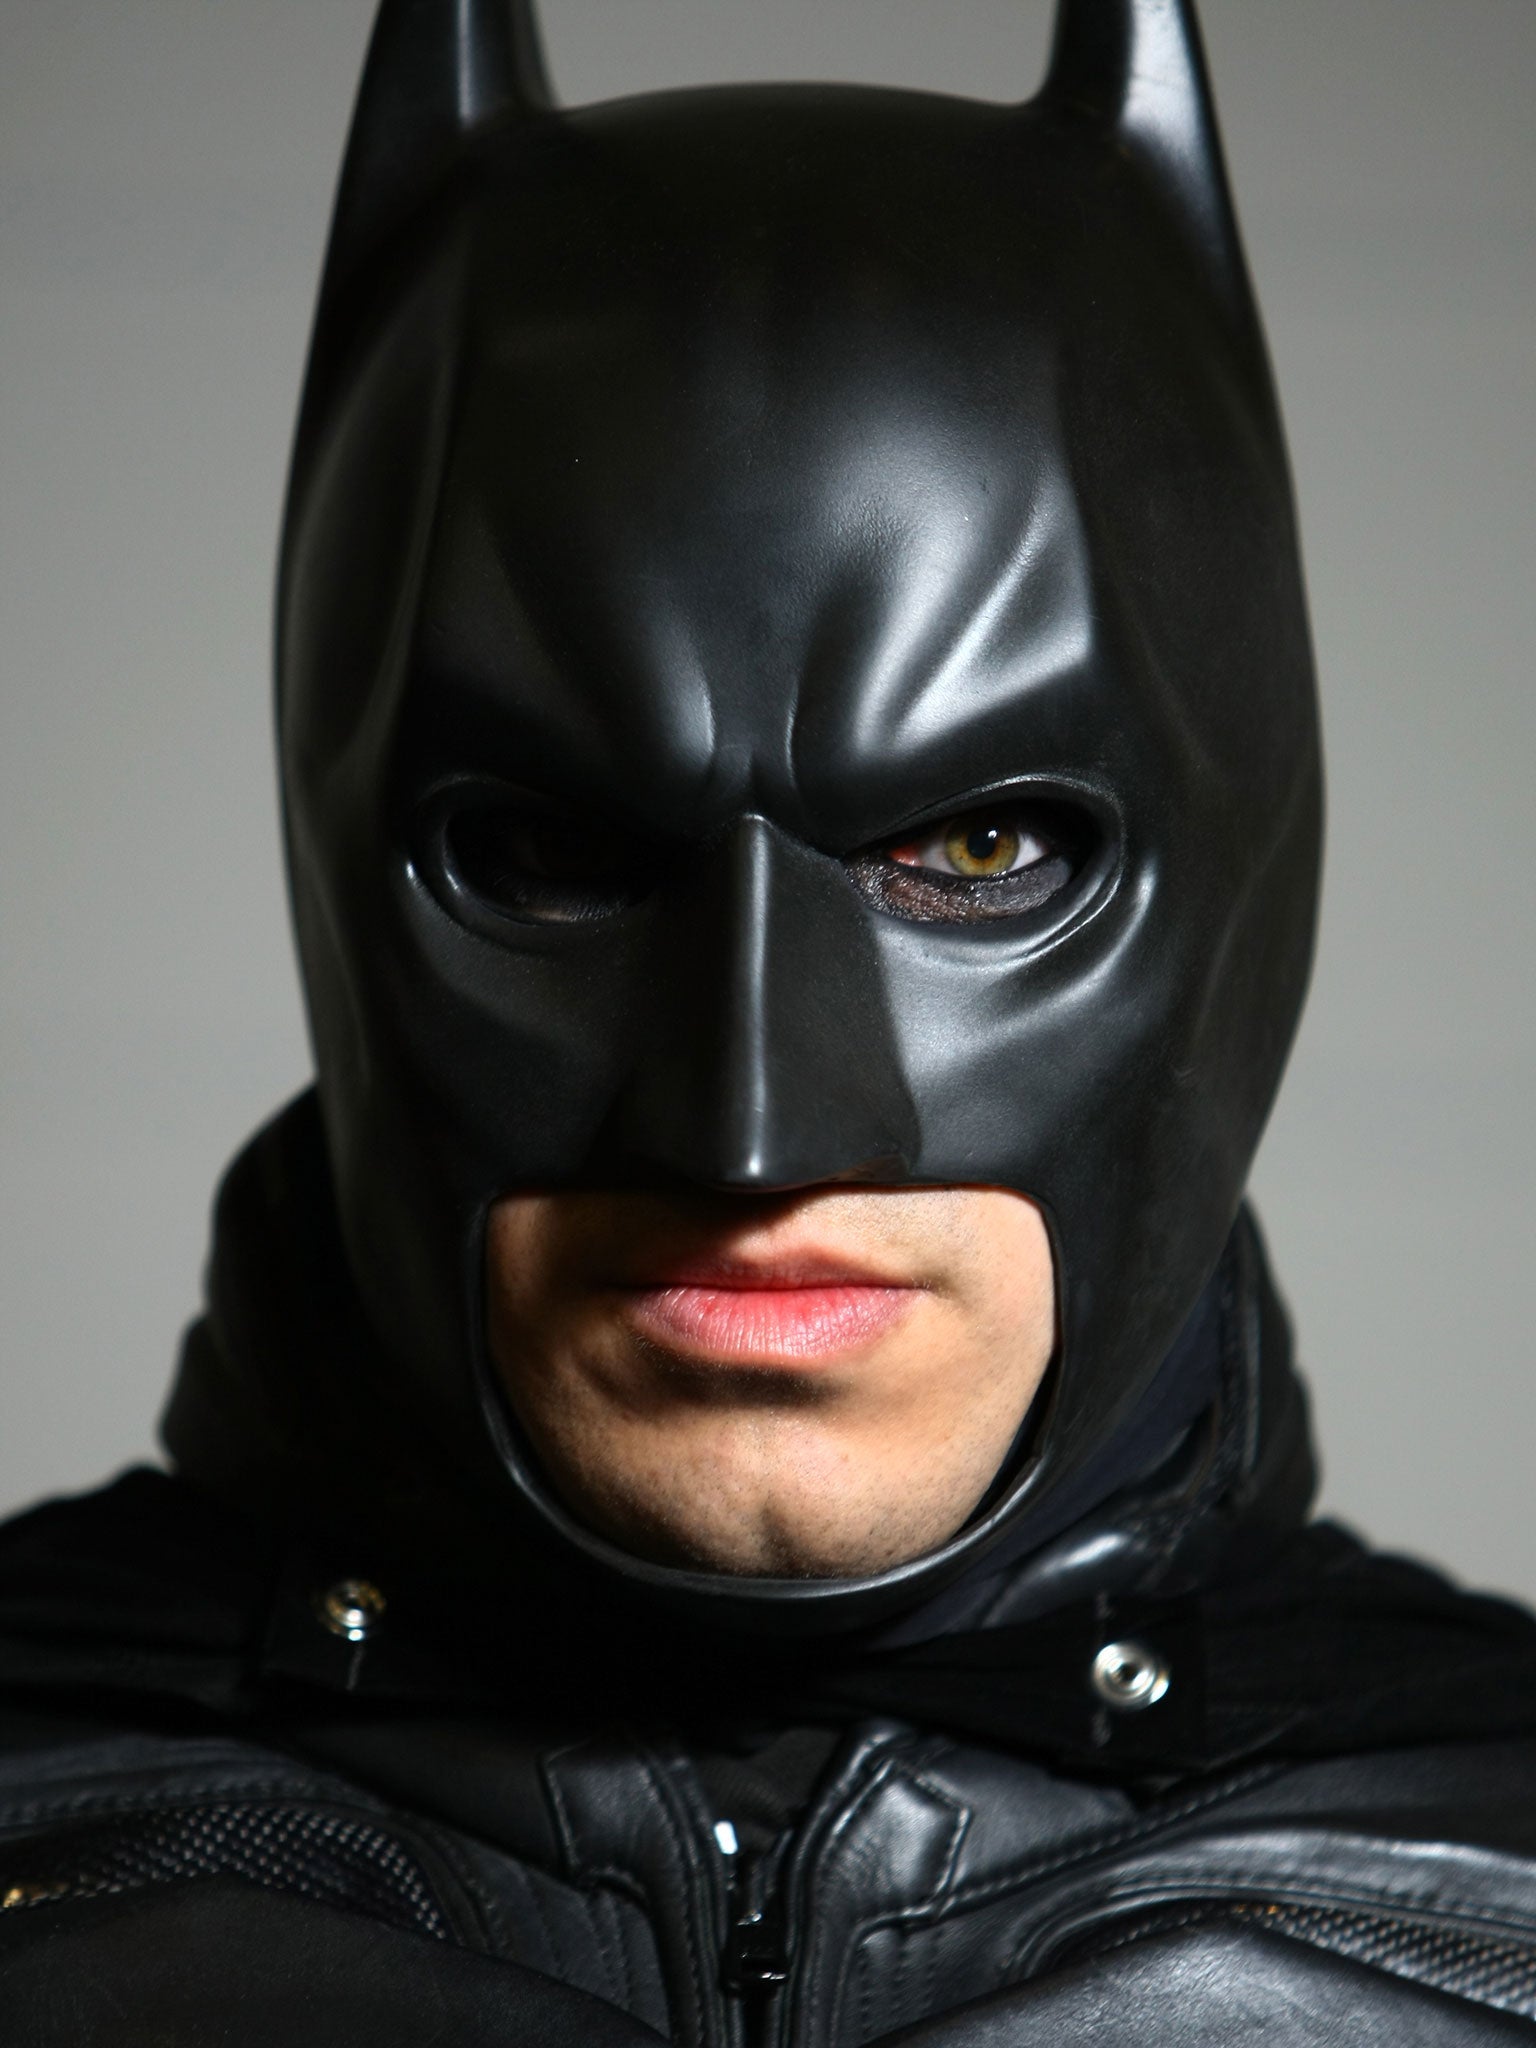 A man in a Batman costume similar to the one worn by the angered impersonator in New York.